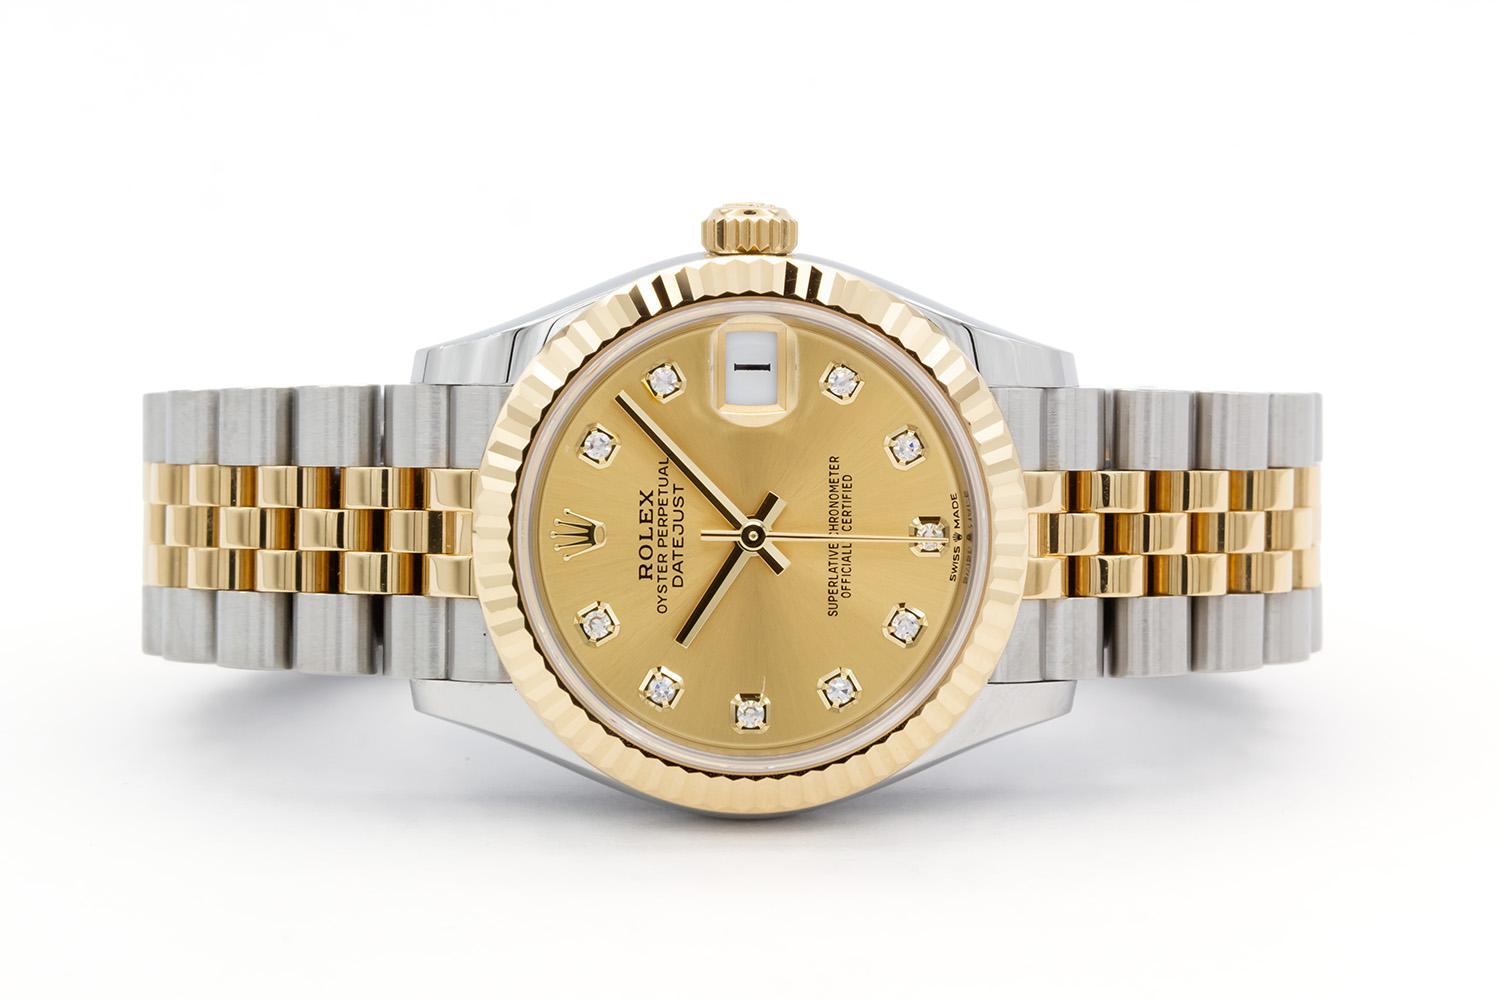 We are pleased to offer this 2023 Rolex Datejust 278273, still under factory warranty through March 2028. It features a 31mm stainless steel case, Rolex factory champagne 10 diamond dial with yellow gold markers and hands, Rolex factory 18k yellow